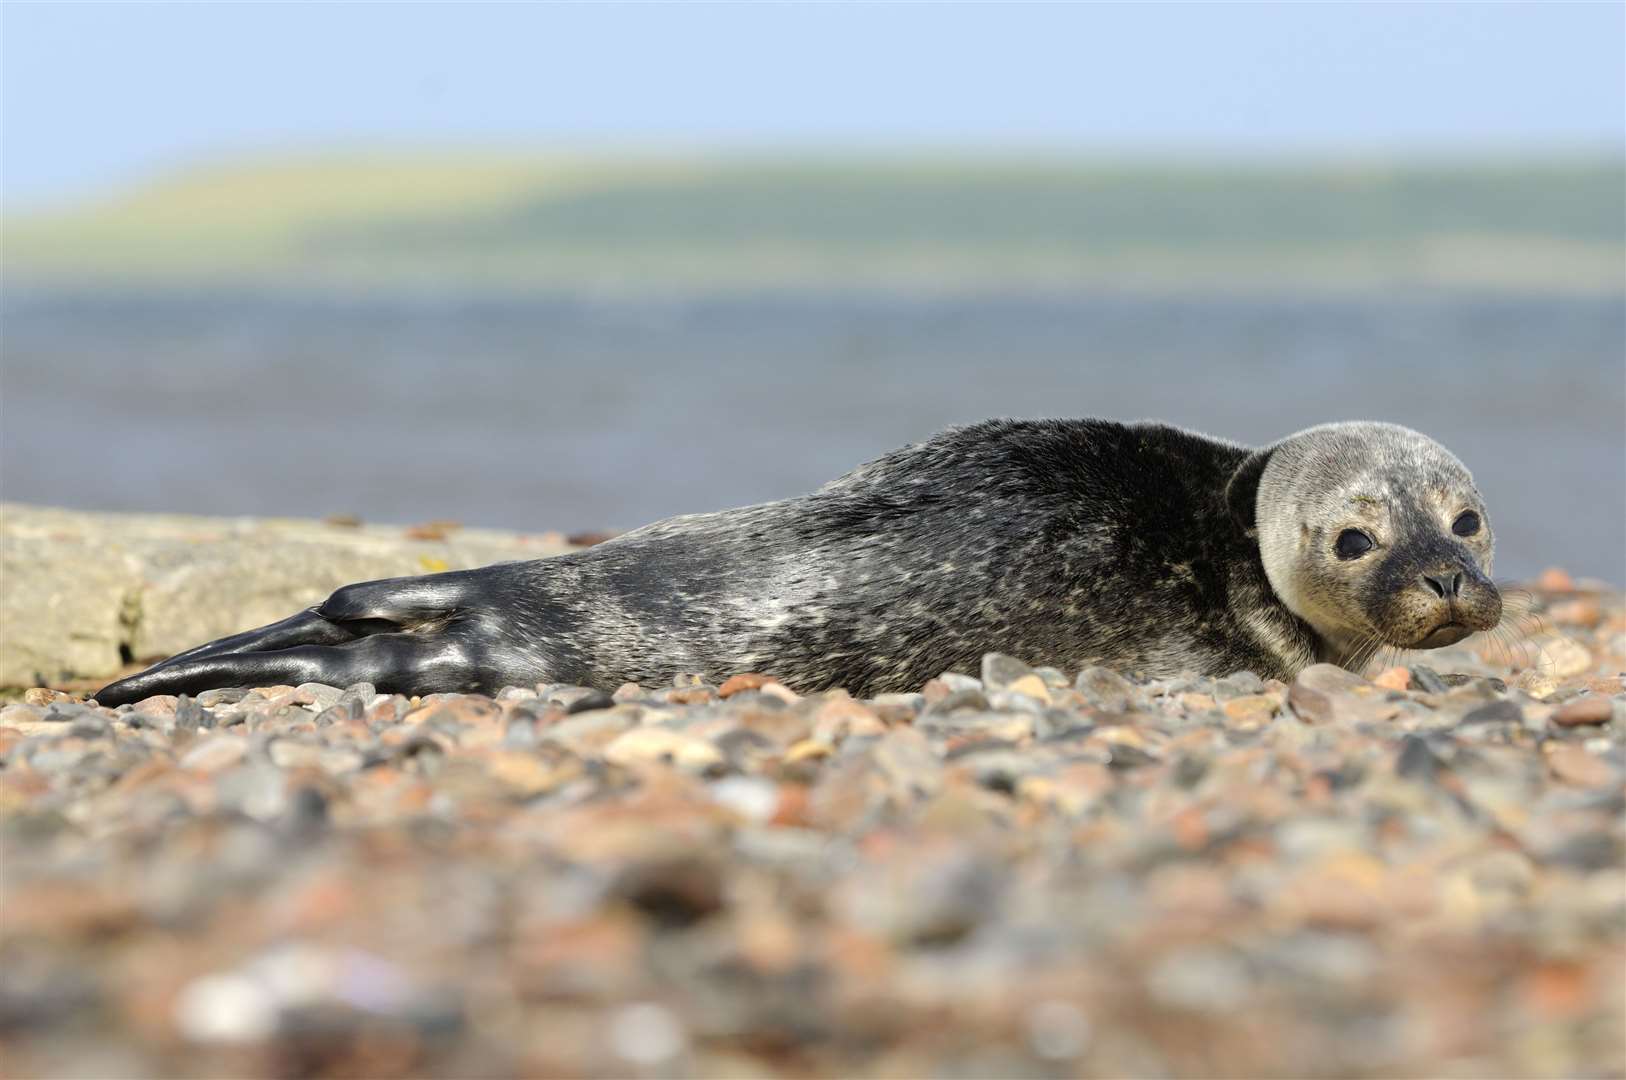 Disturbance can mean seal pups are separated from their mothers. Picture: Lorne Gill / NatureScot